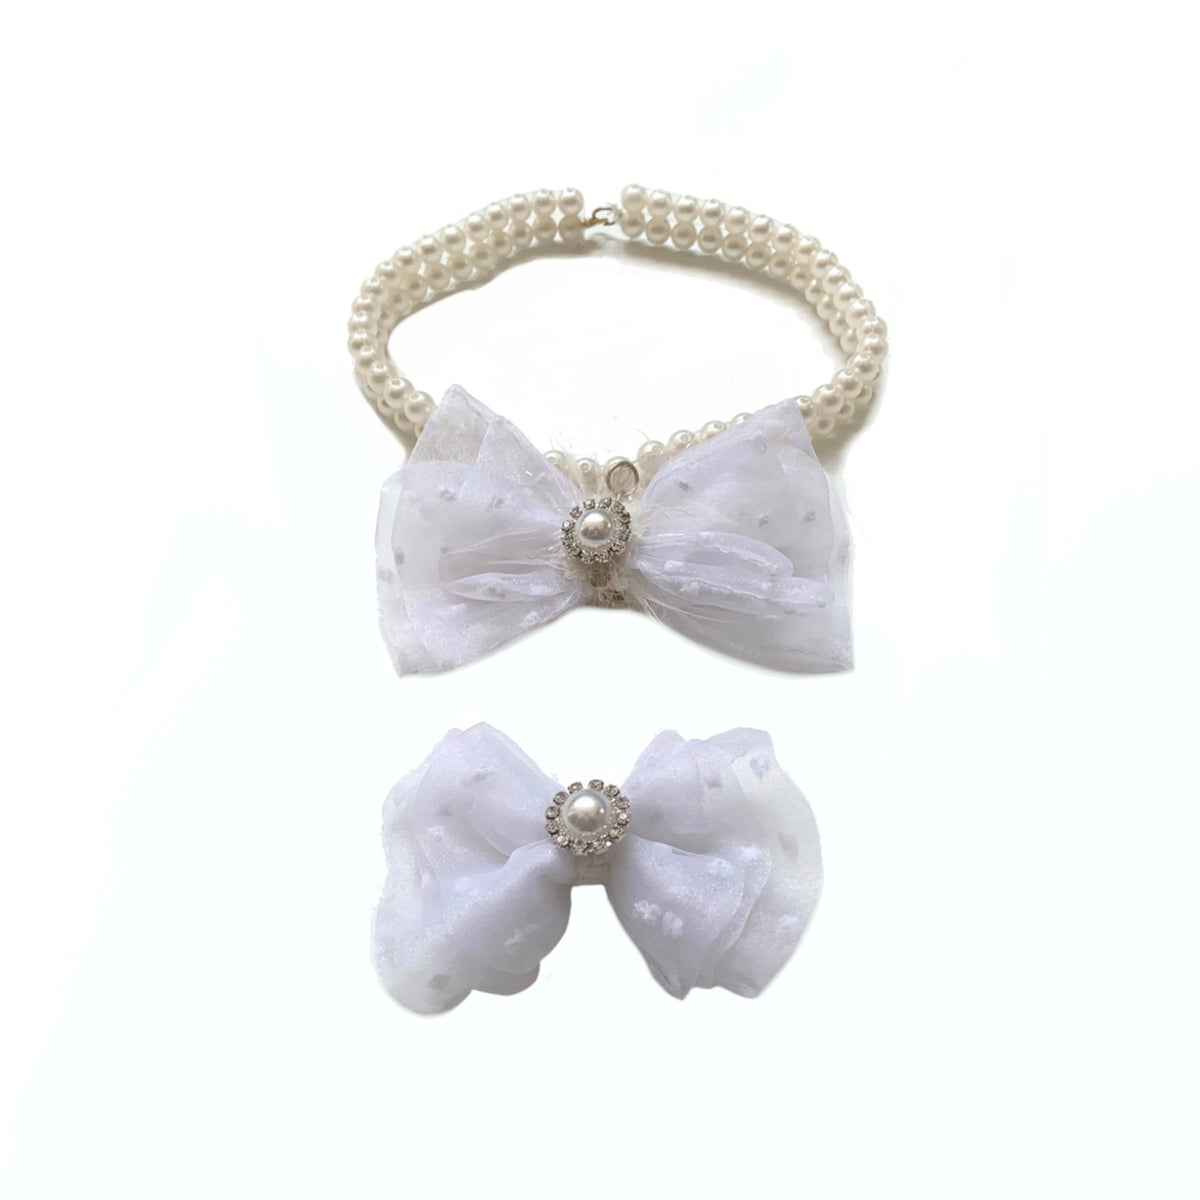 WHITE PEARL BOW NECKLACE + BOW